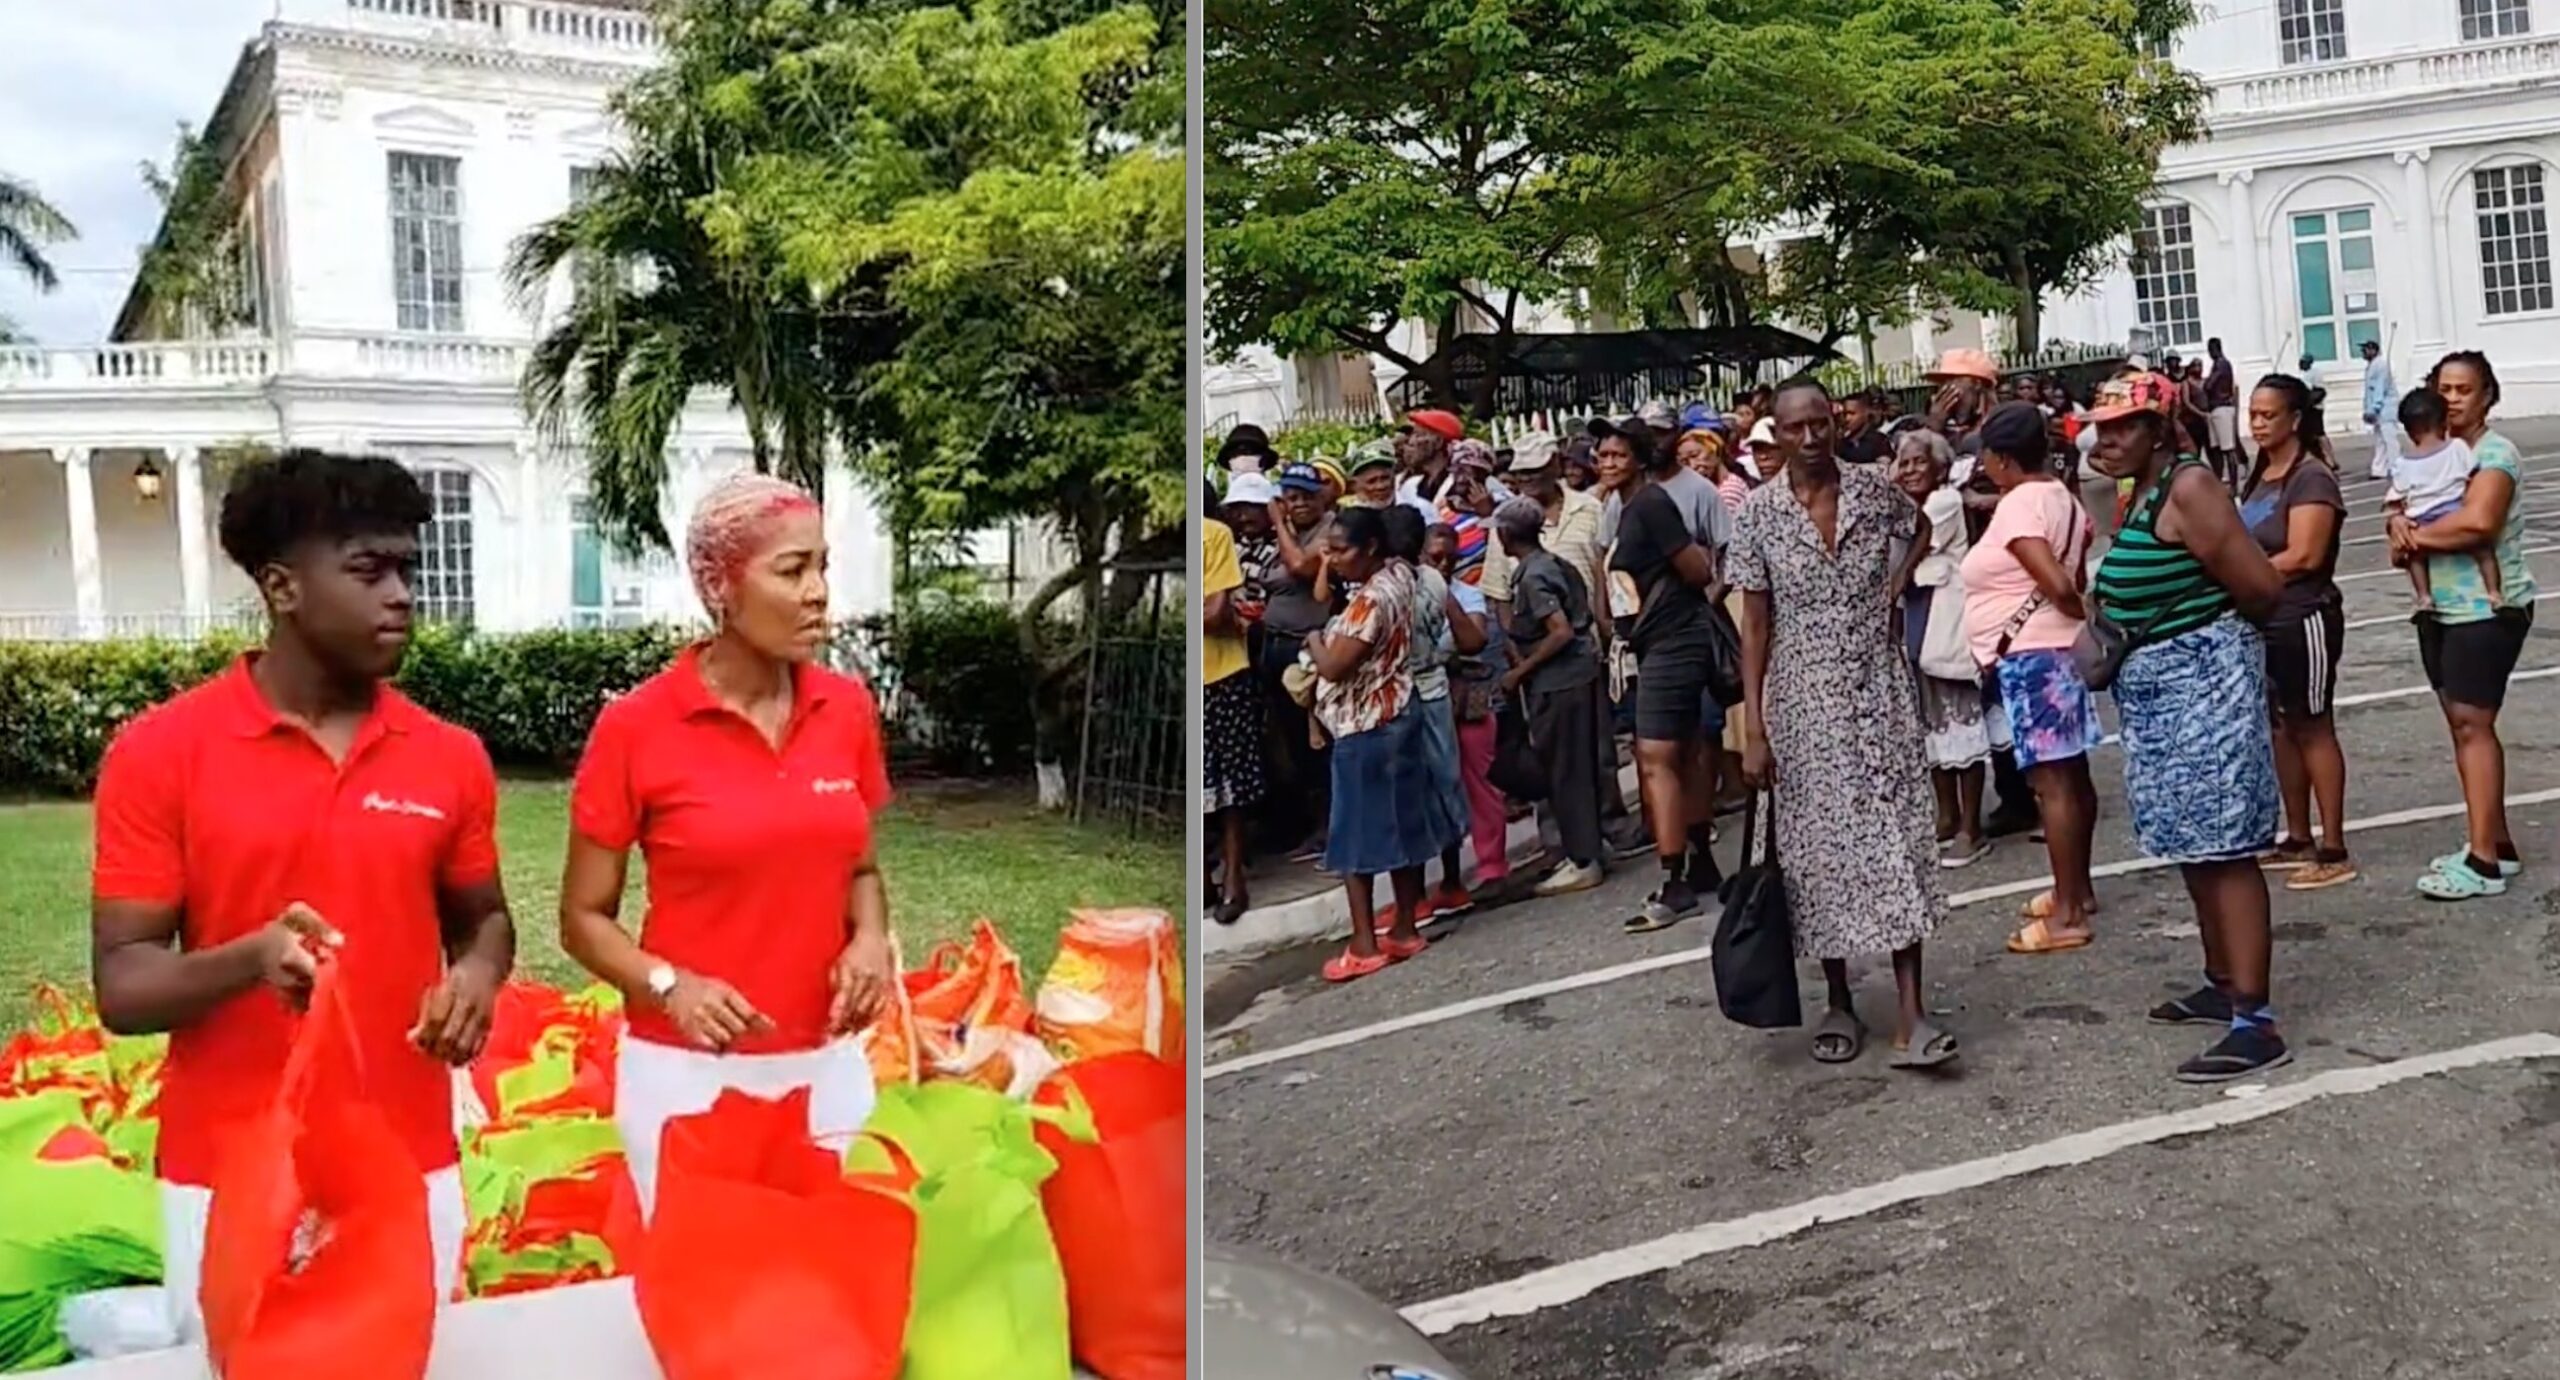 D’Angel Shares Scenes from Her Christmas Giveaway in Spanish Town - Watch Videos